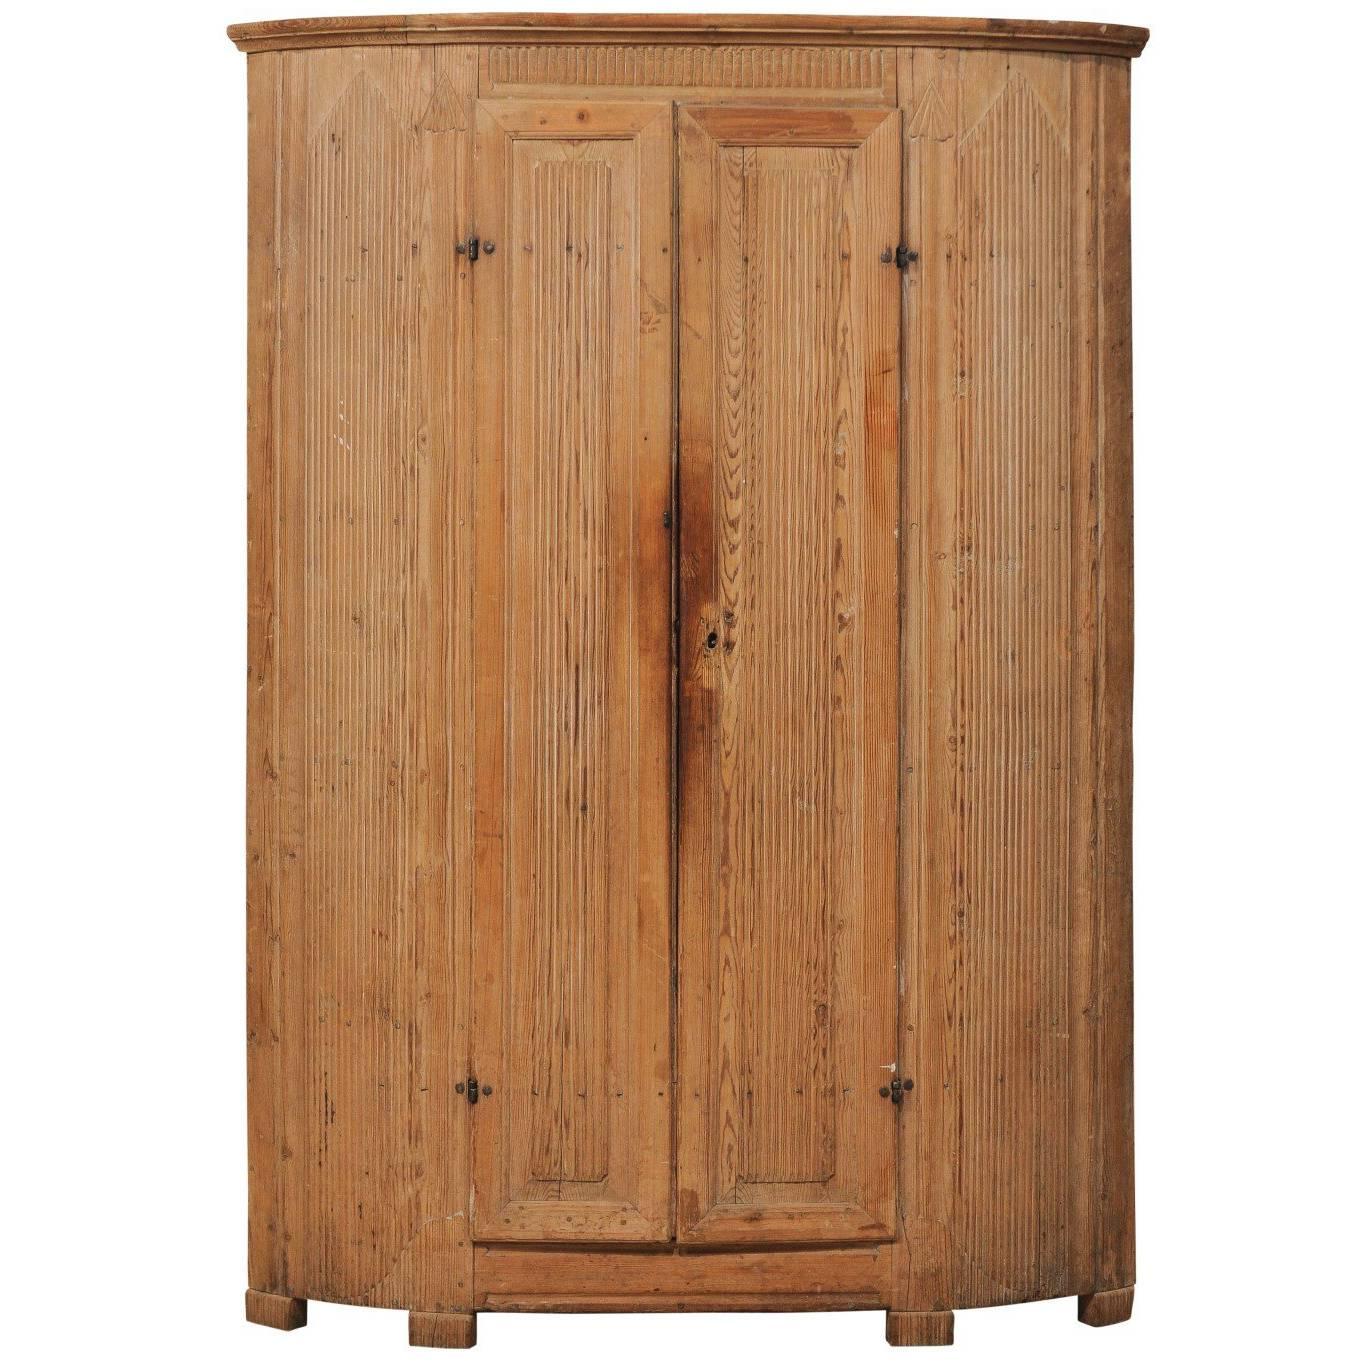 19th Century Period Gustavian Corner Cabinet, Vertical Reeds and Natural Wood